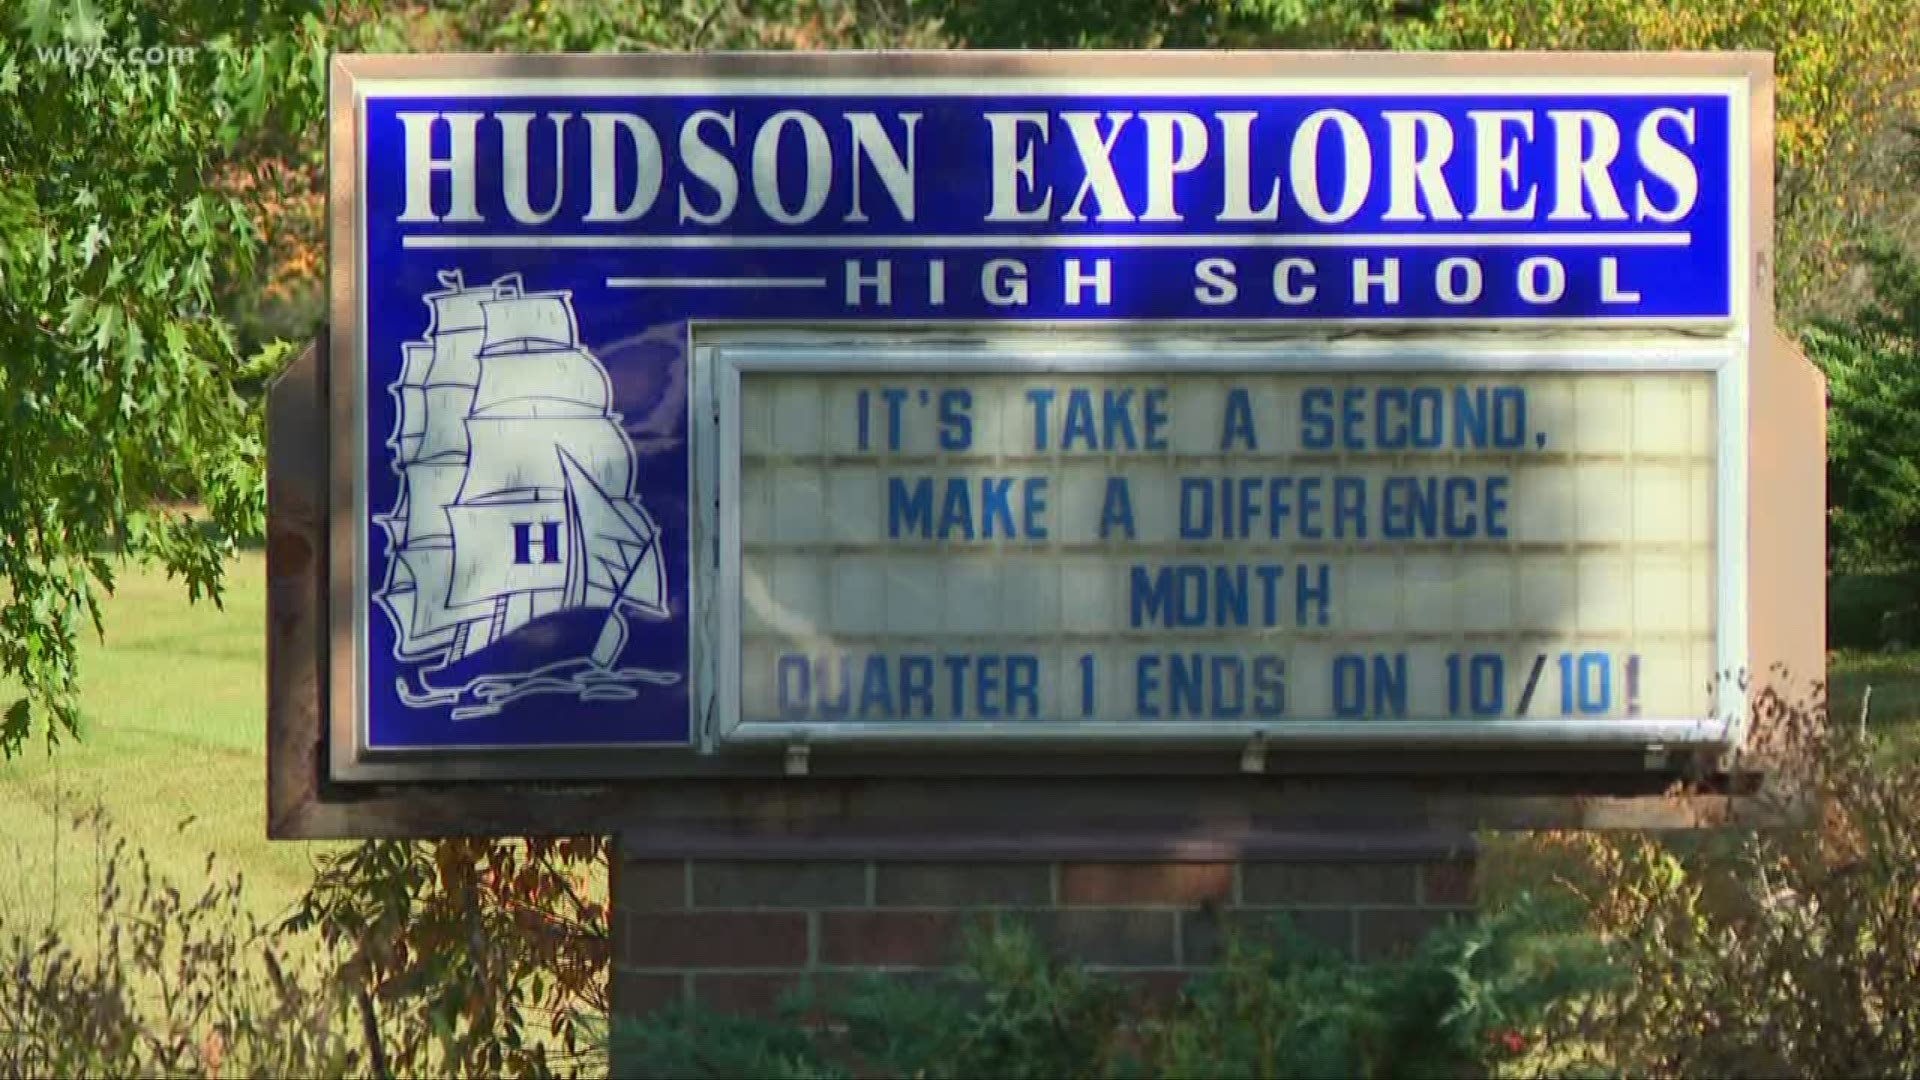 The principal of Hudson High School says racist language will not be tolerated. The district also says that all victims need to come forward.